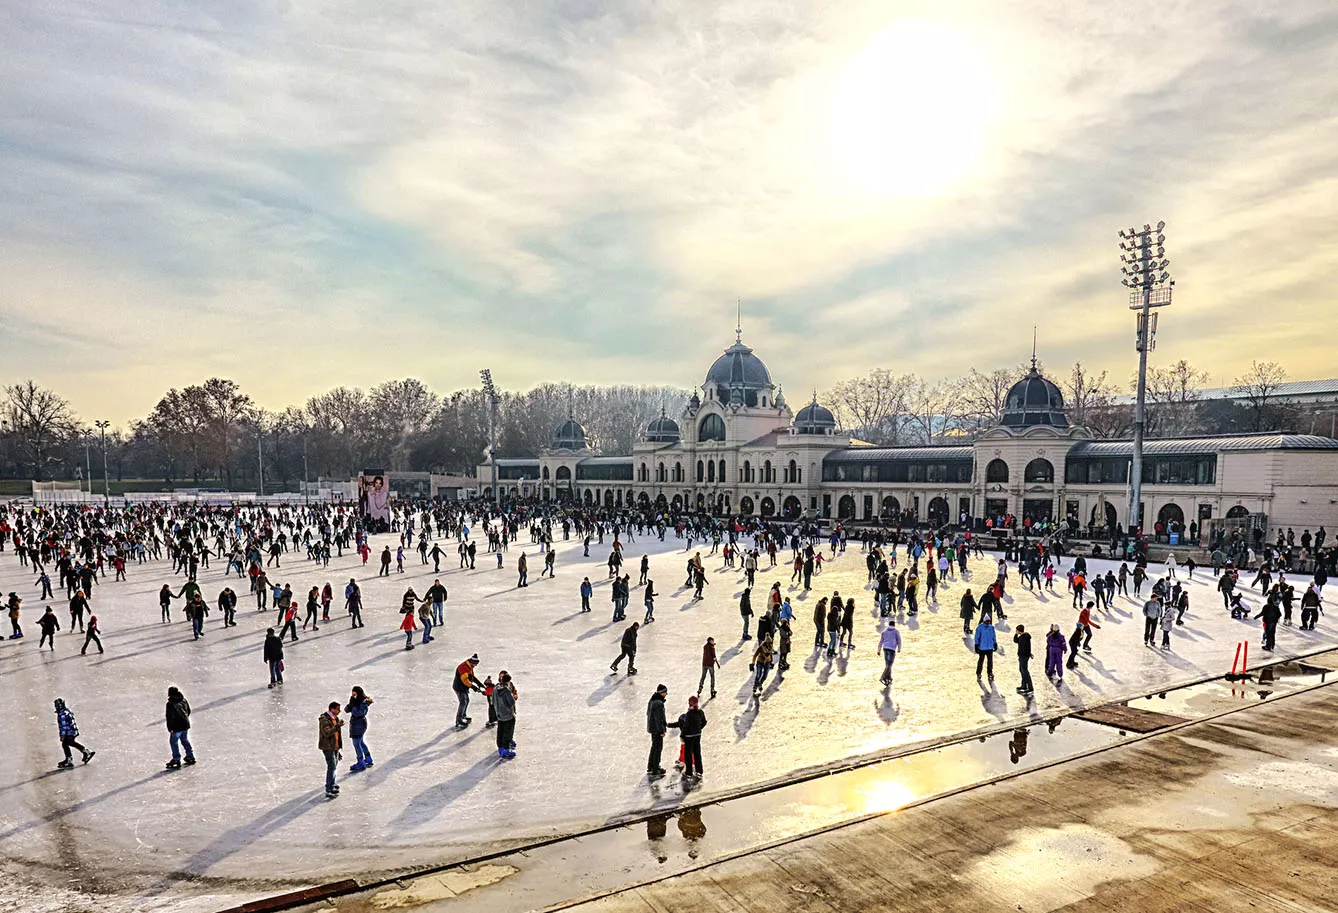 Europe's largest outdoor ice skating rink